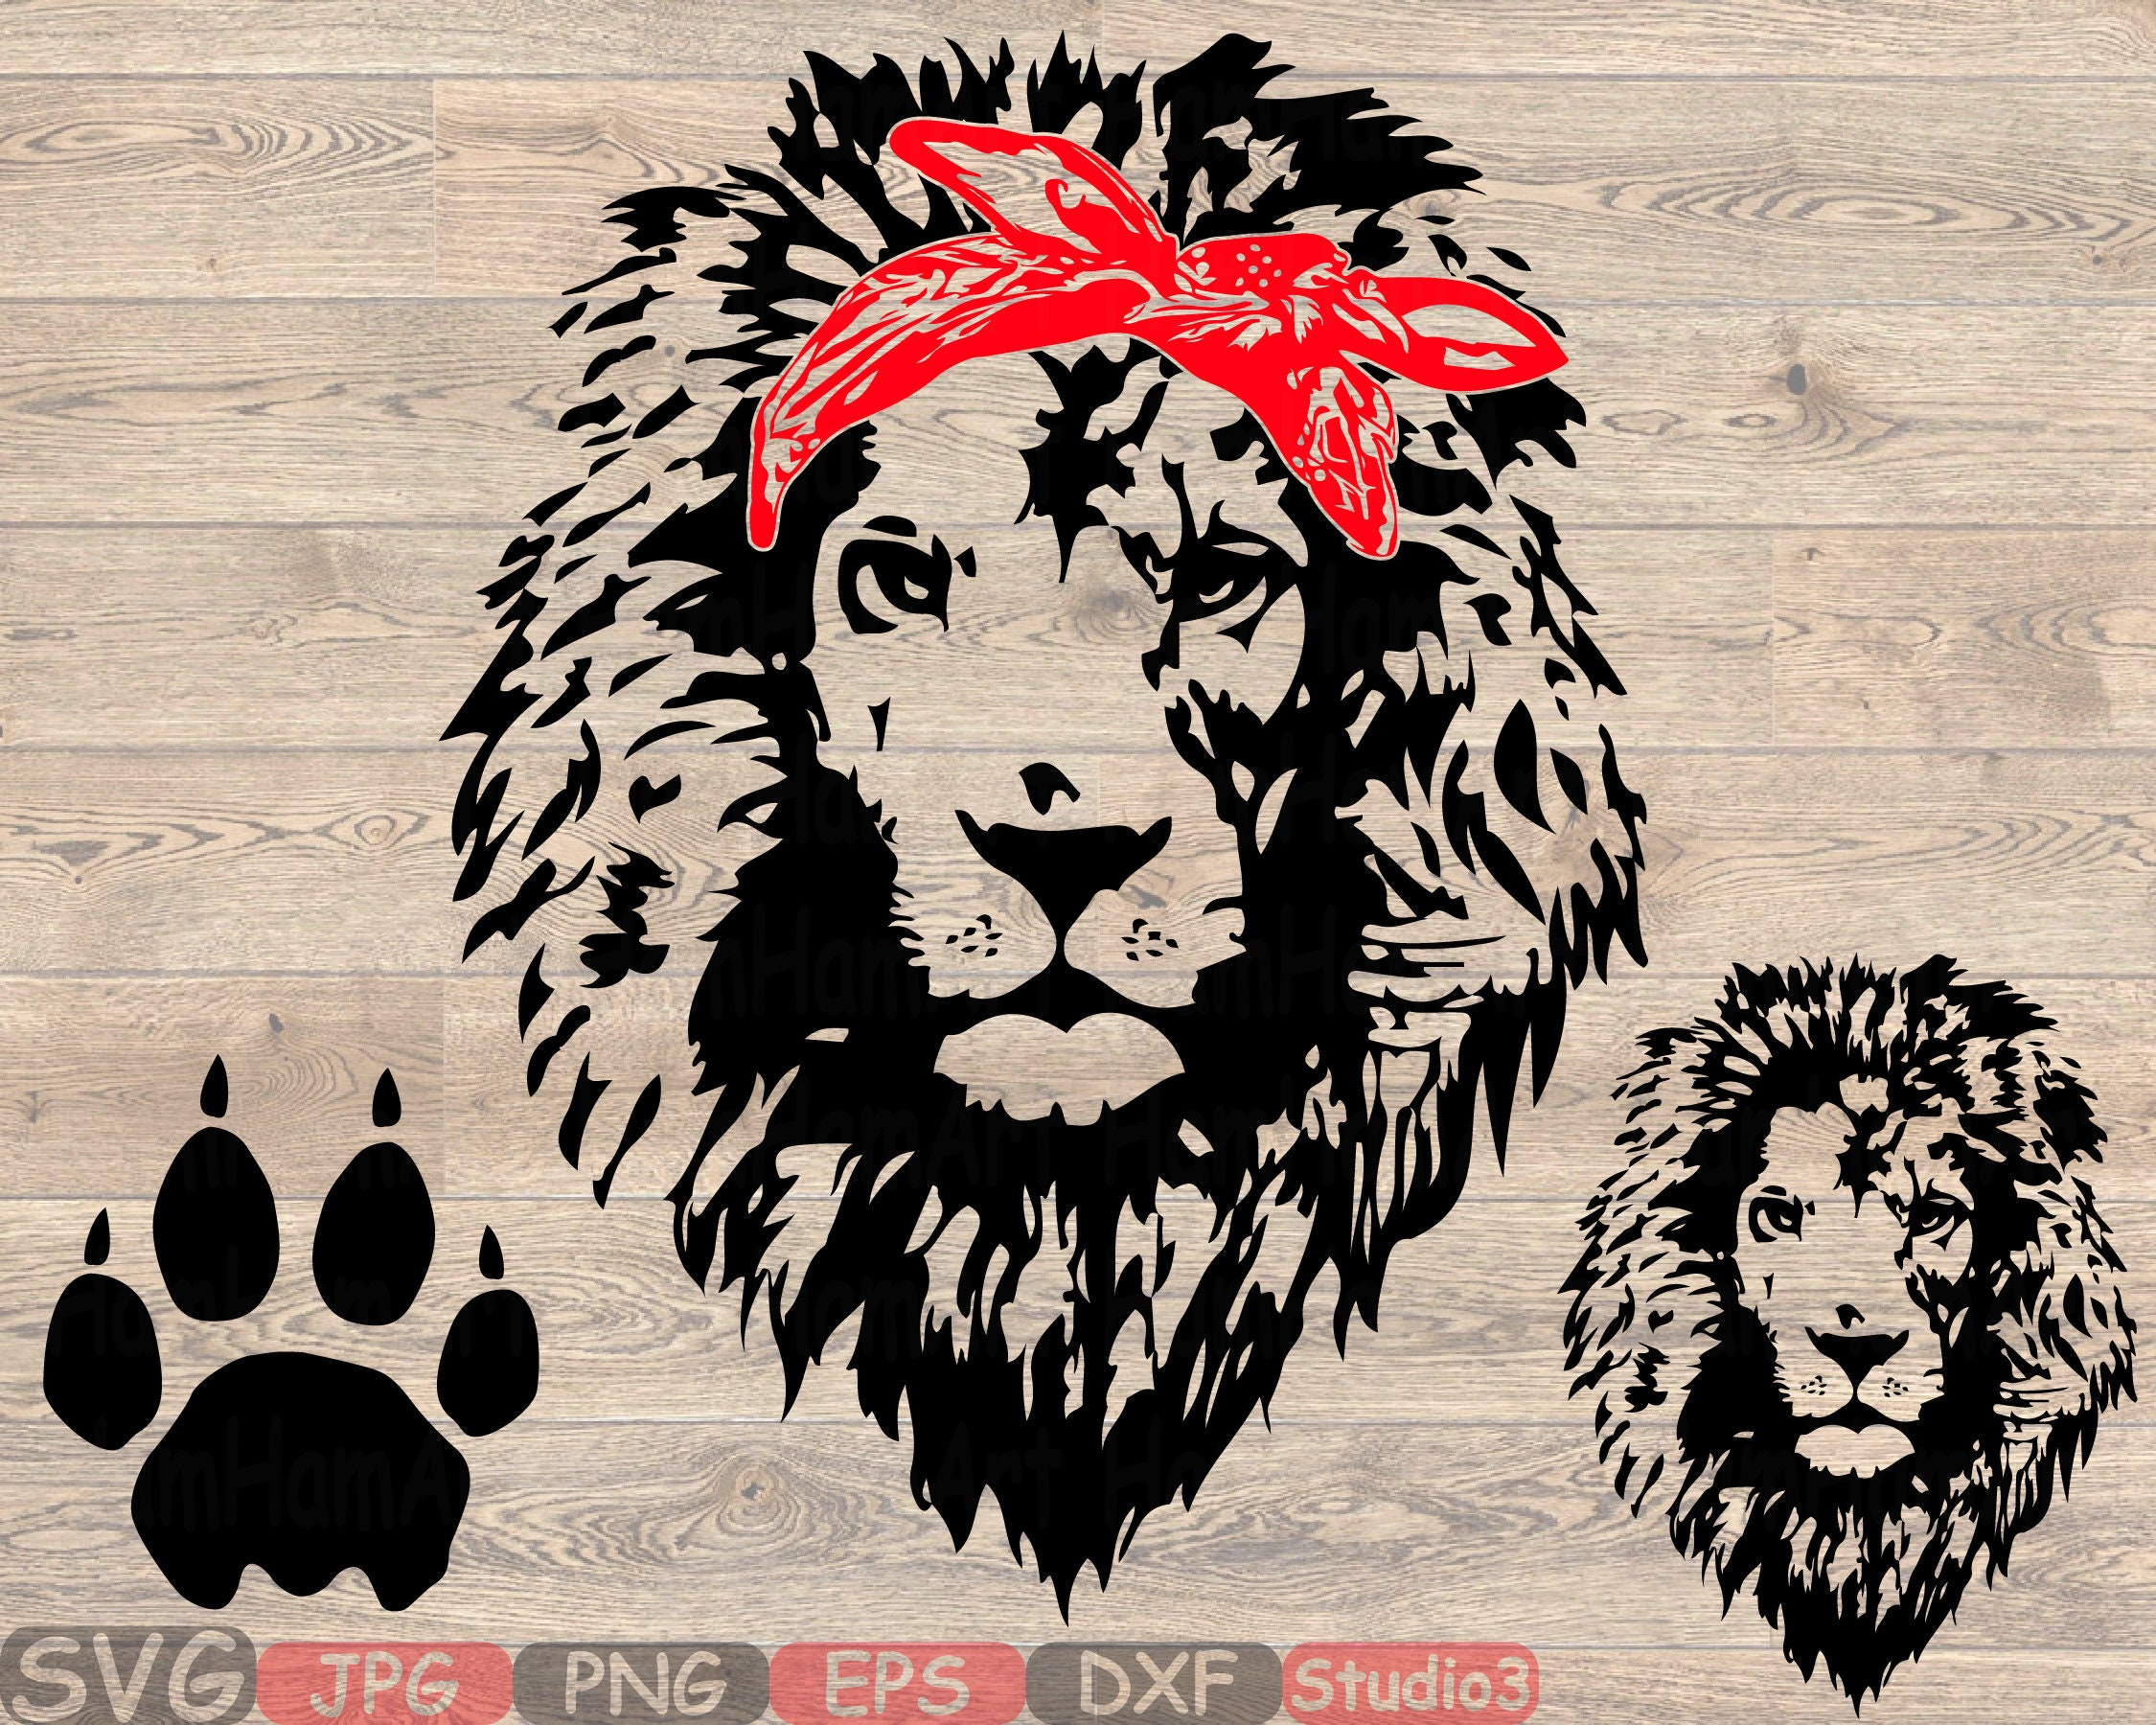 Download Lion Head whit Bandana Silhouette SVG Cutting Files Clip Art | Etsy